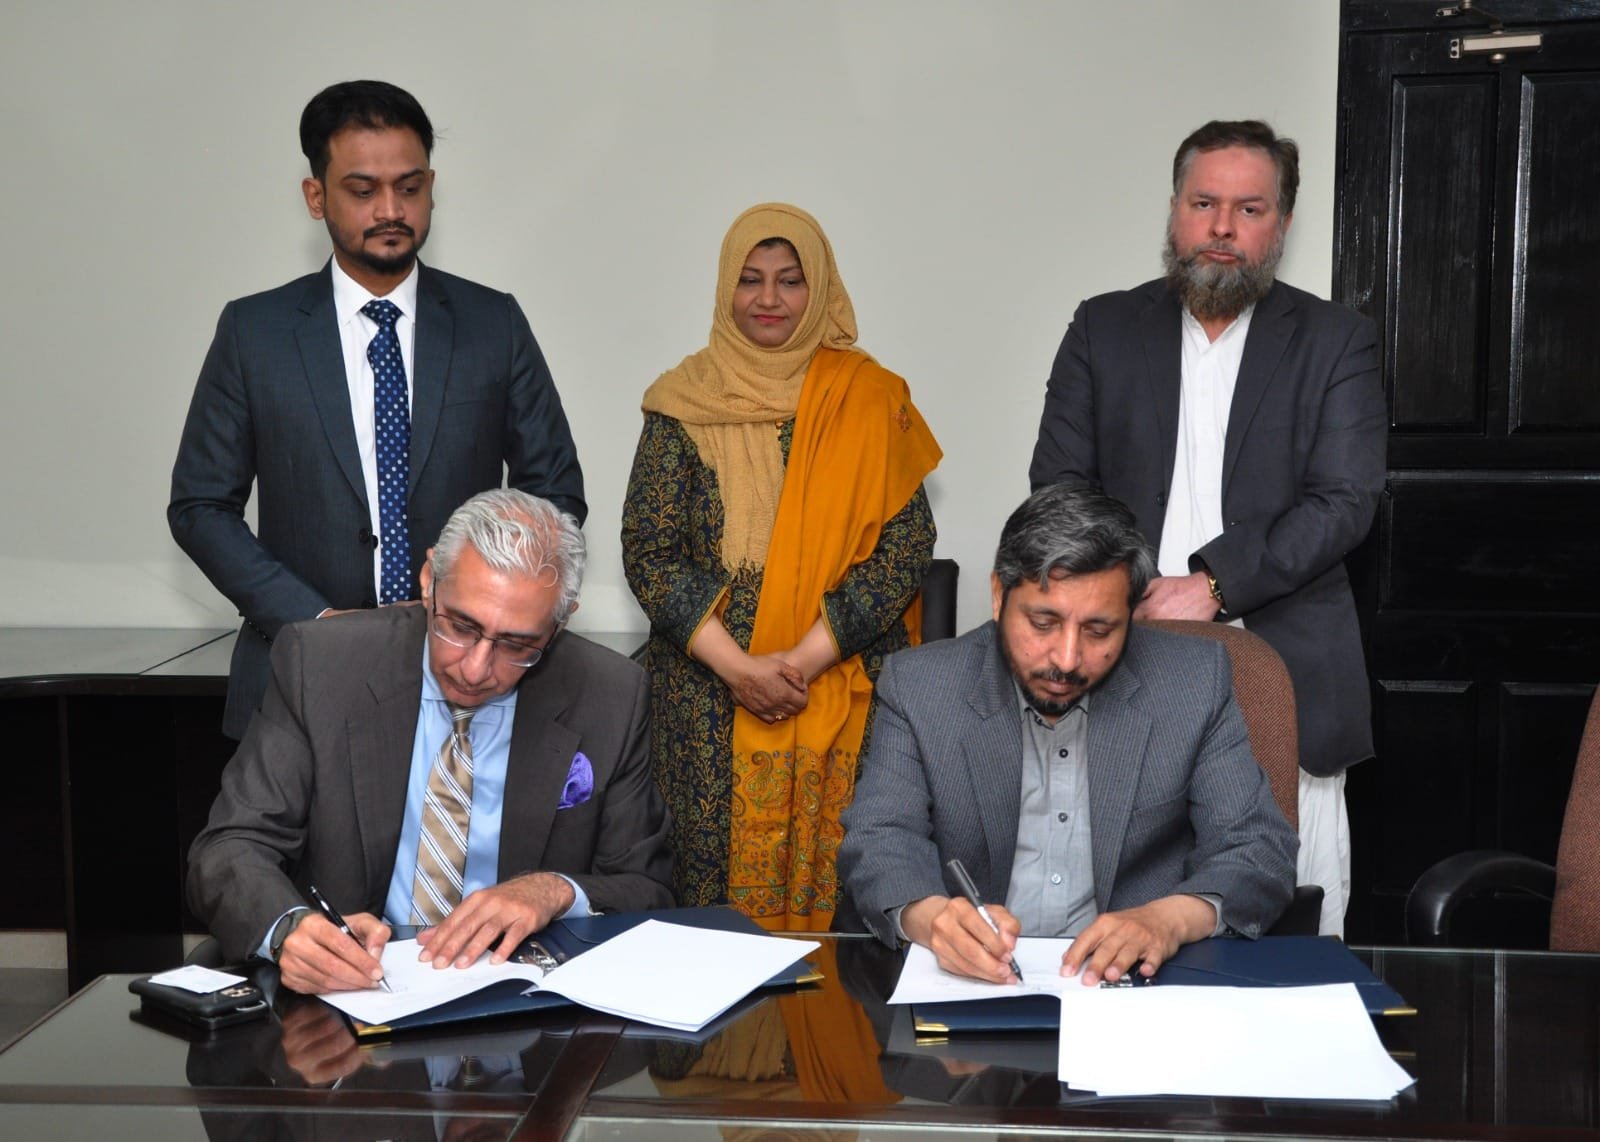 COMSATS Signs LoI for Sustainable Energy Transition in Pakistan